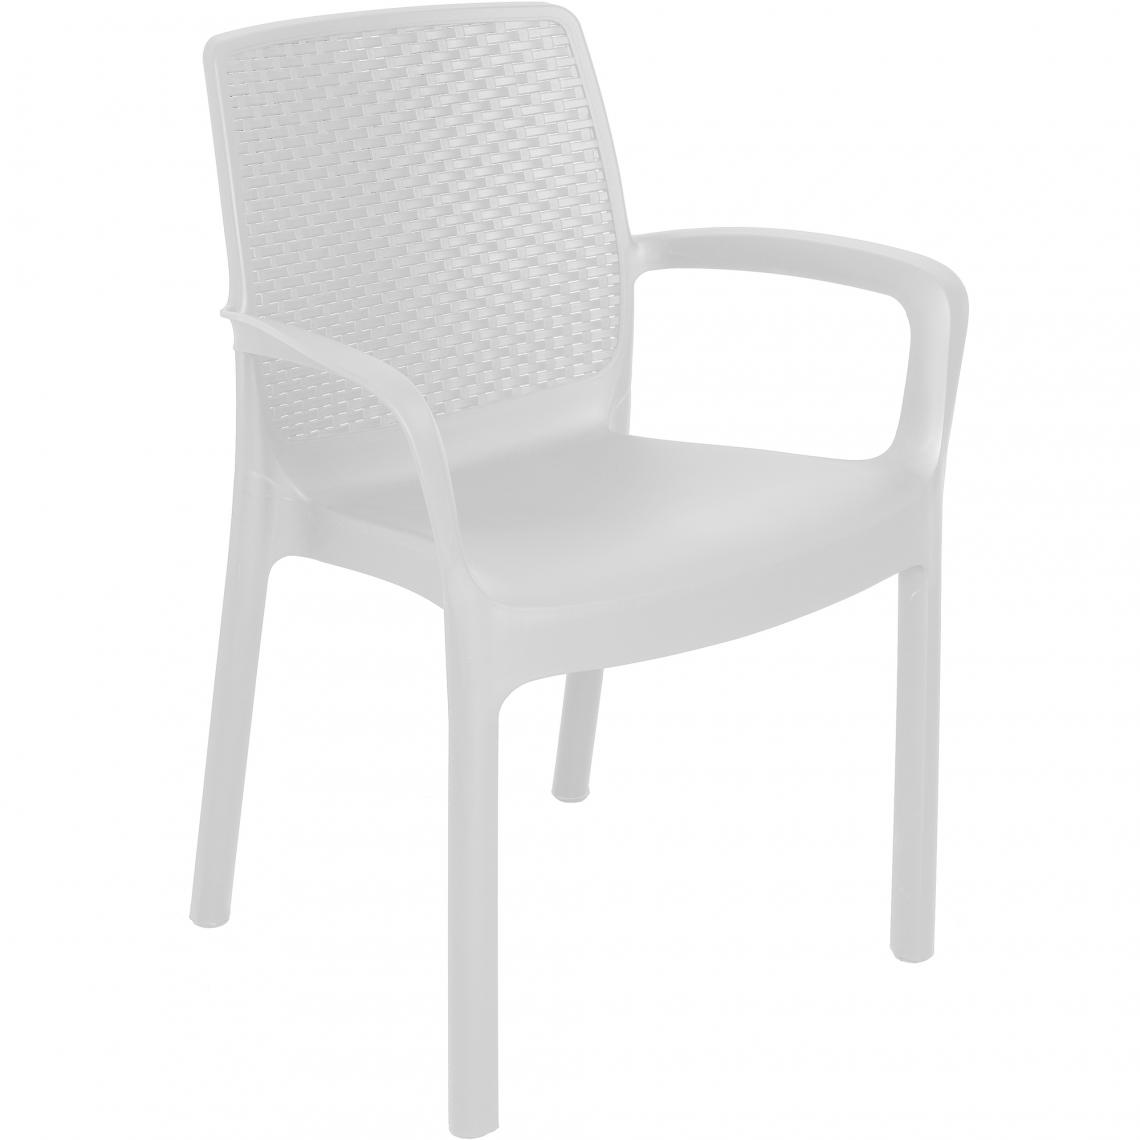 Alter - Chaise empilable effet rotin, Made in Italy, couleur blanche, Dimensions 54 x 82 x 60,5 cm - Chaises